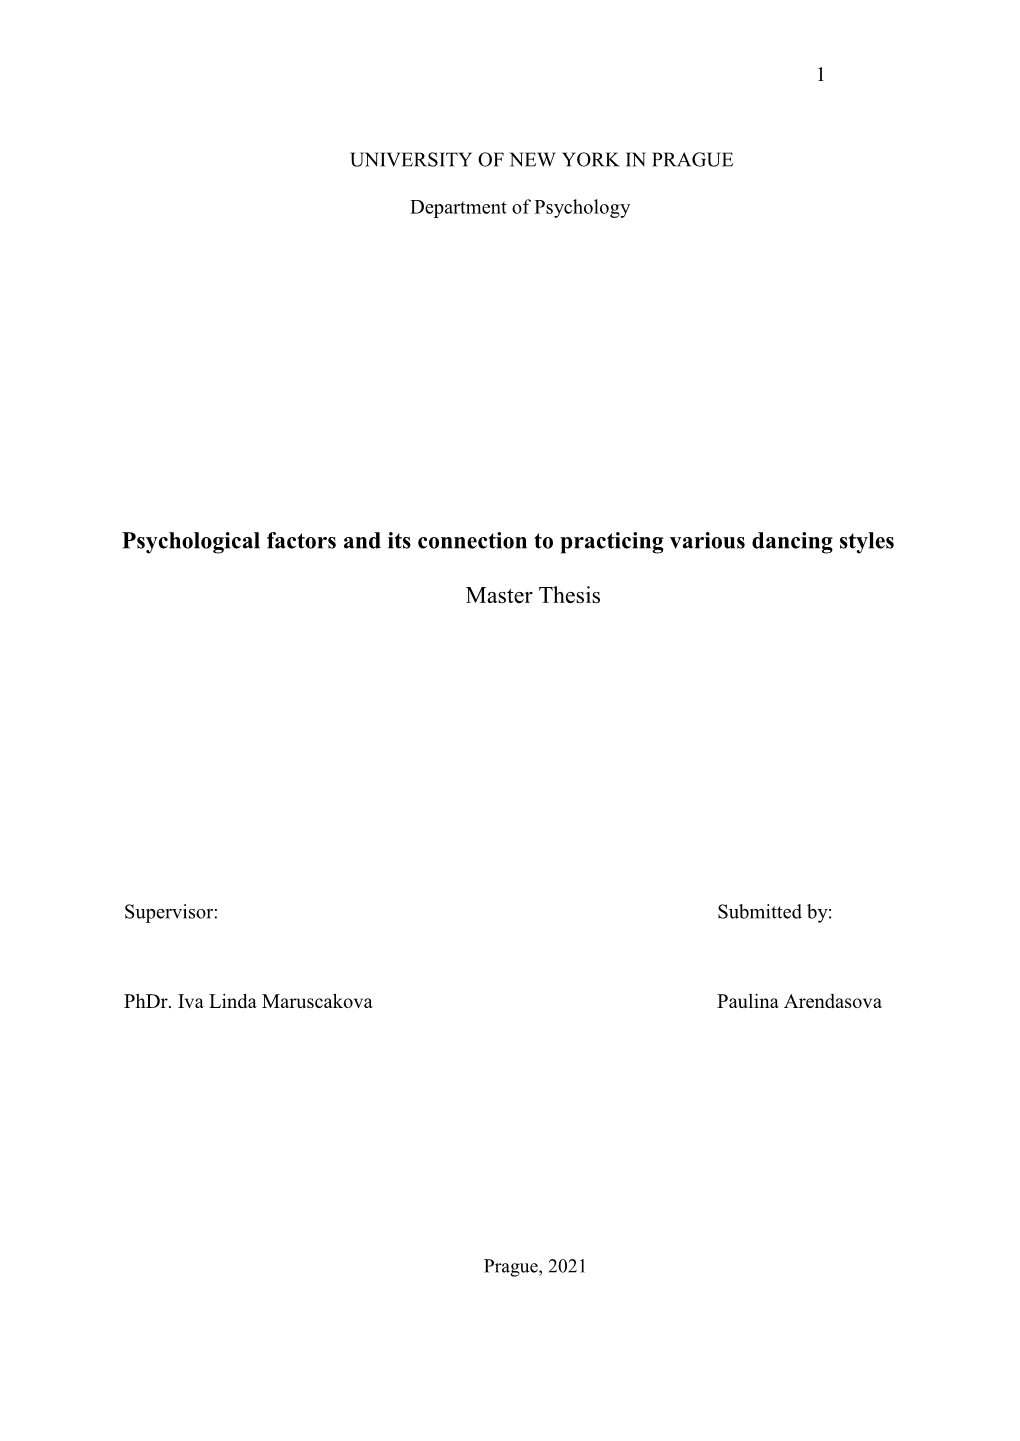 Psychological Factors and Its Connection to Practicing Various Dancing Styles